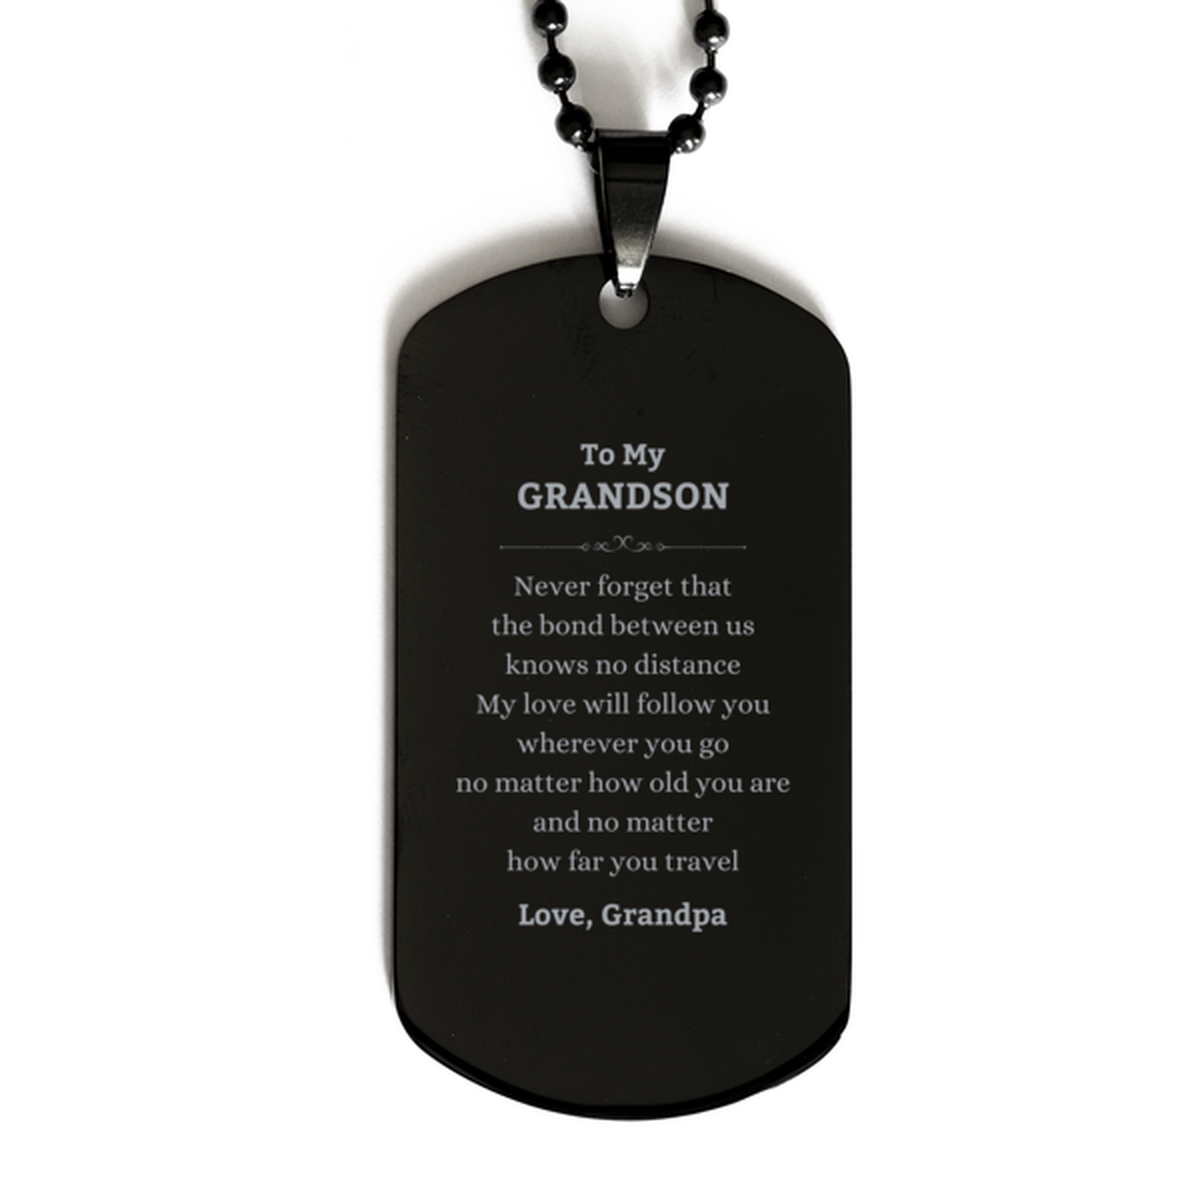 Grandson Birthday Gifts from Grandpa, Adjustable Black Dog Tag for Grandson Christmas Graduation Unique Gifts Grandson Never forget that the bond between us knows no distance. Love, Grandpa